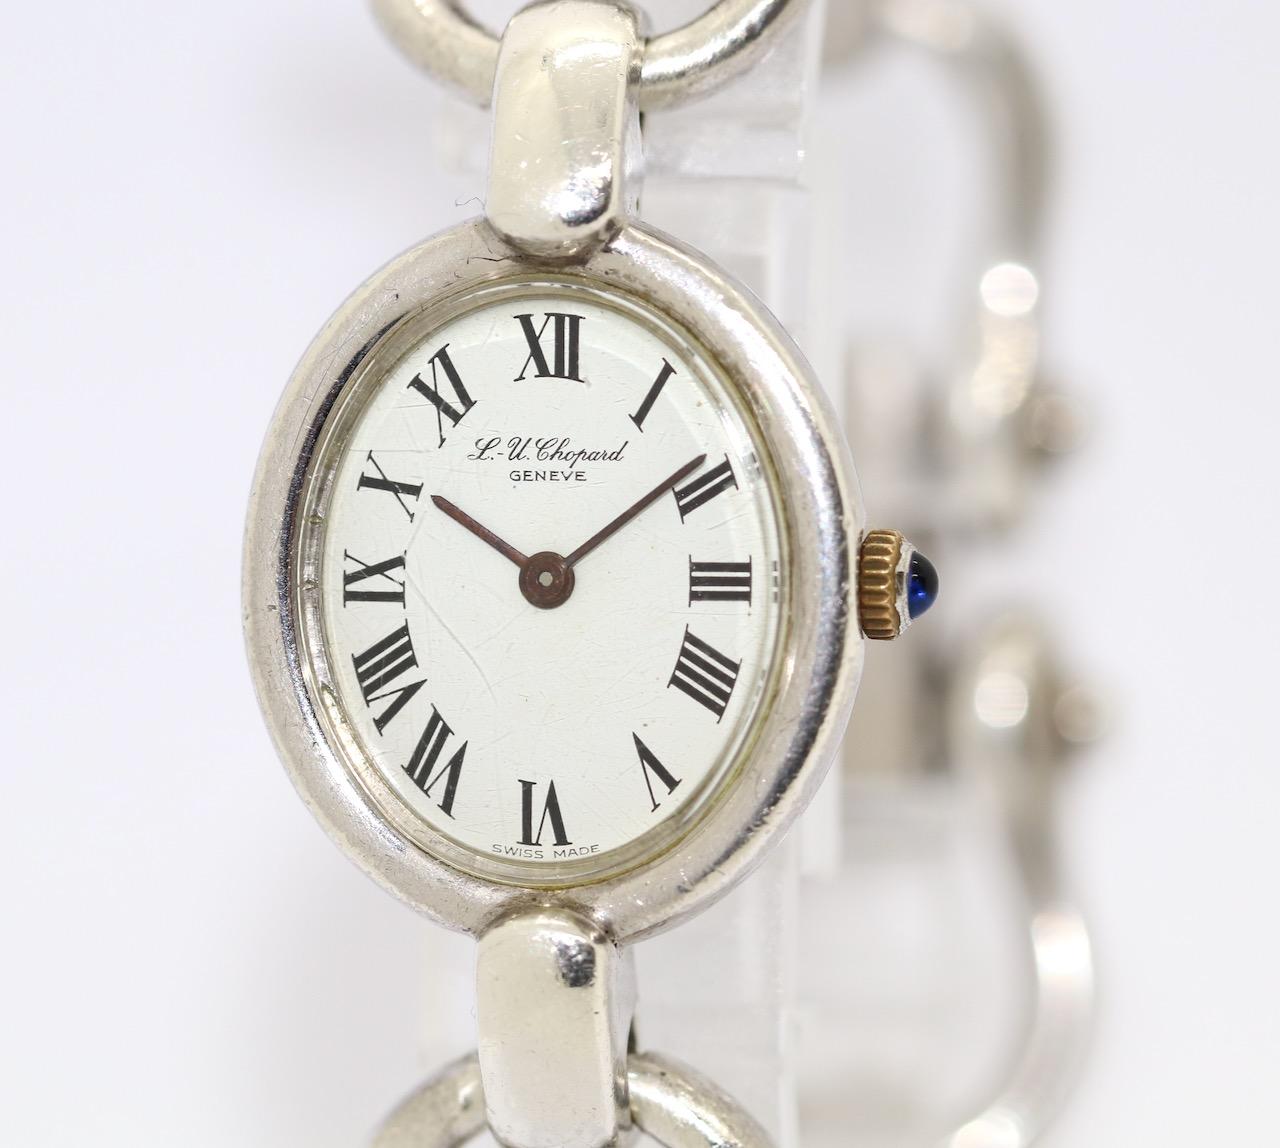 Heavy Chopard Ladies Wrist Watch 925 Sterling Silver 

Case and Strap made of solid 925 Sterling Silver.
Mechanical, manual movement.

Including certificate of authenticity.
